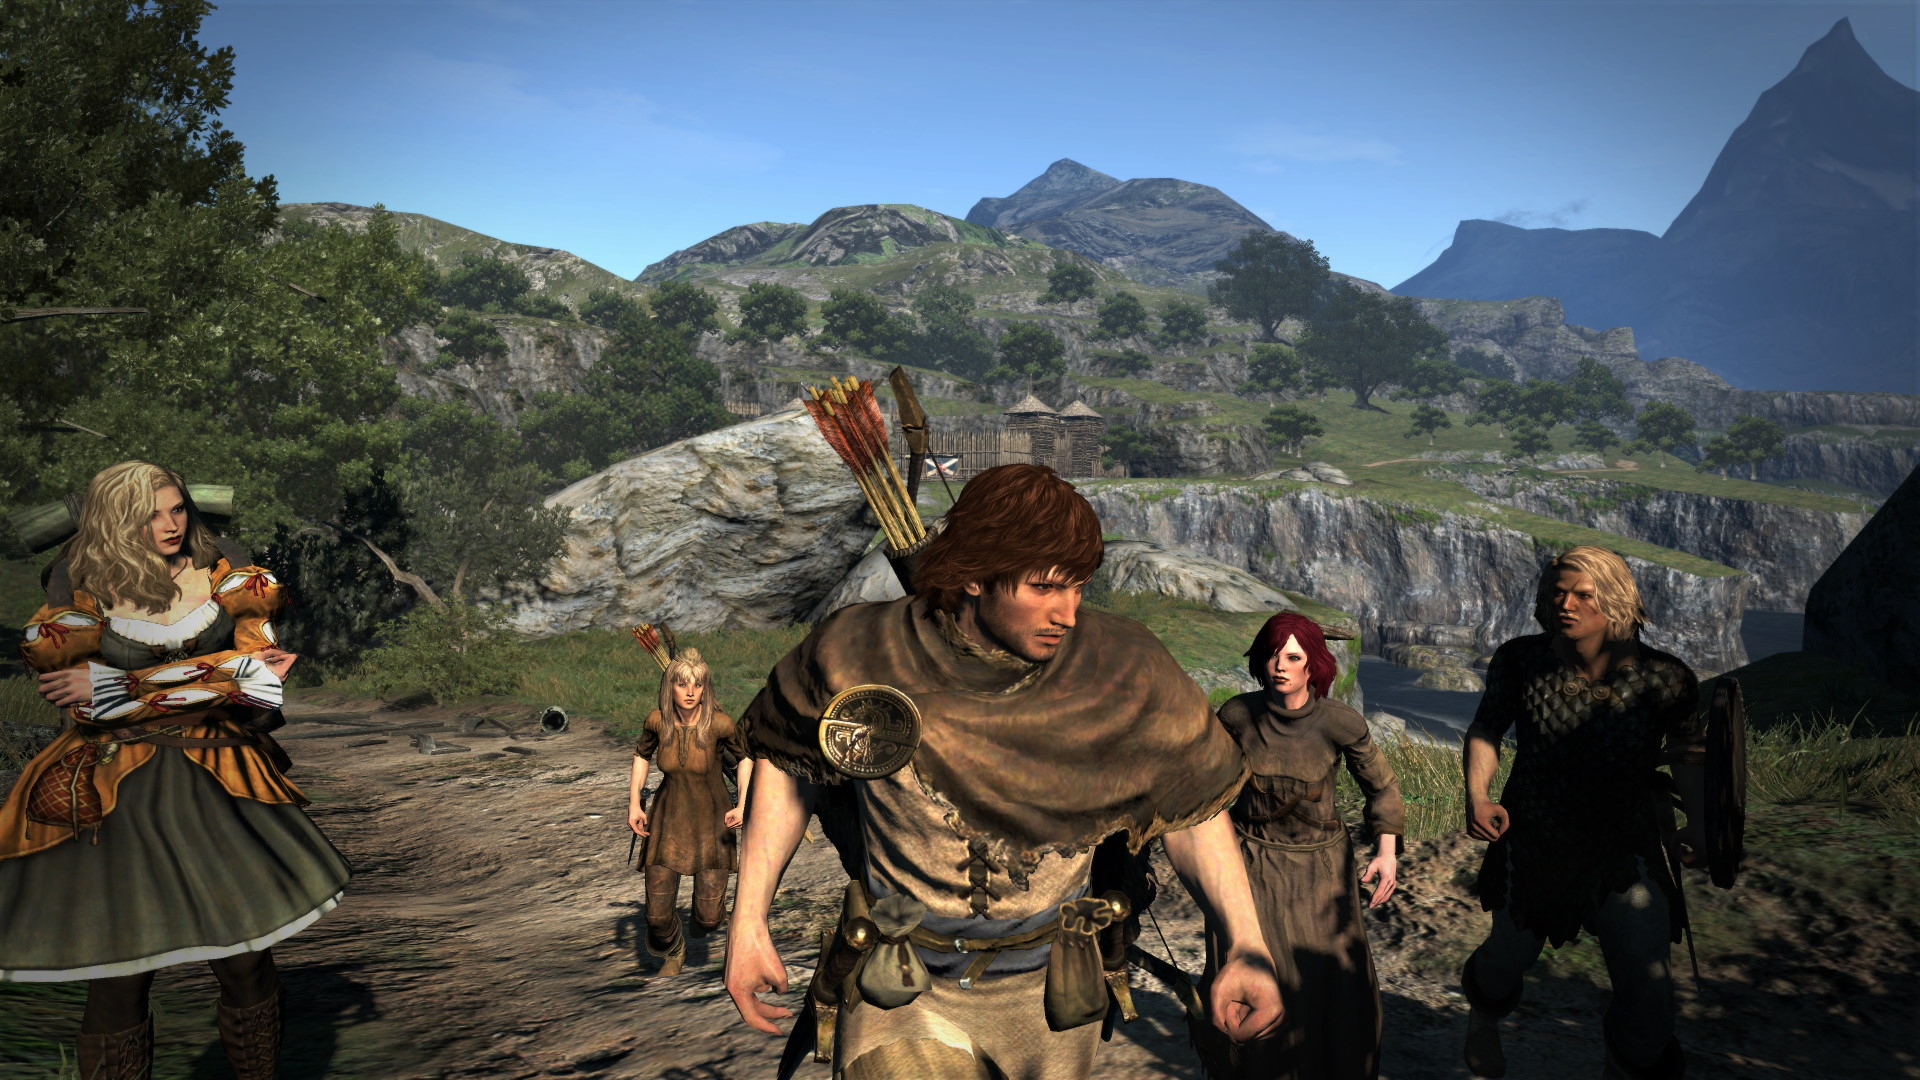 Dragon's Dogma 2 will run on the same engine as Resident Evil Village,  leaker says